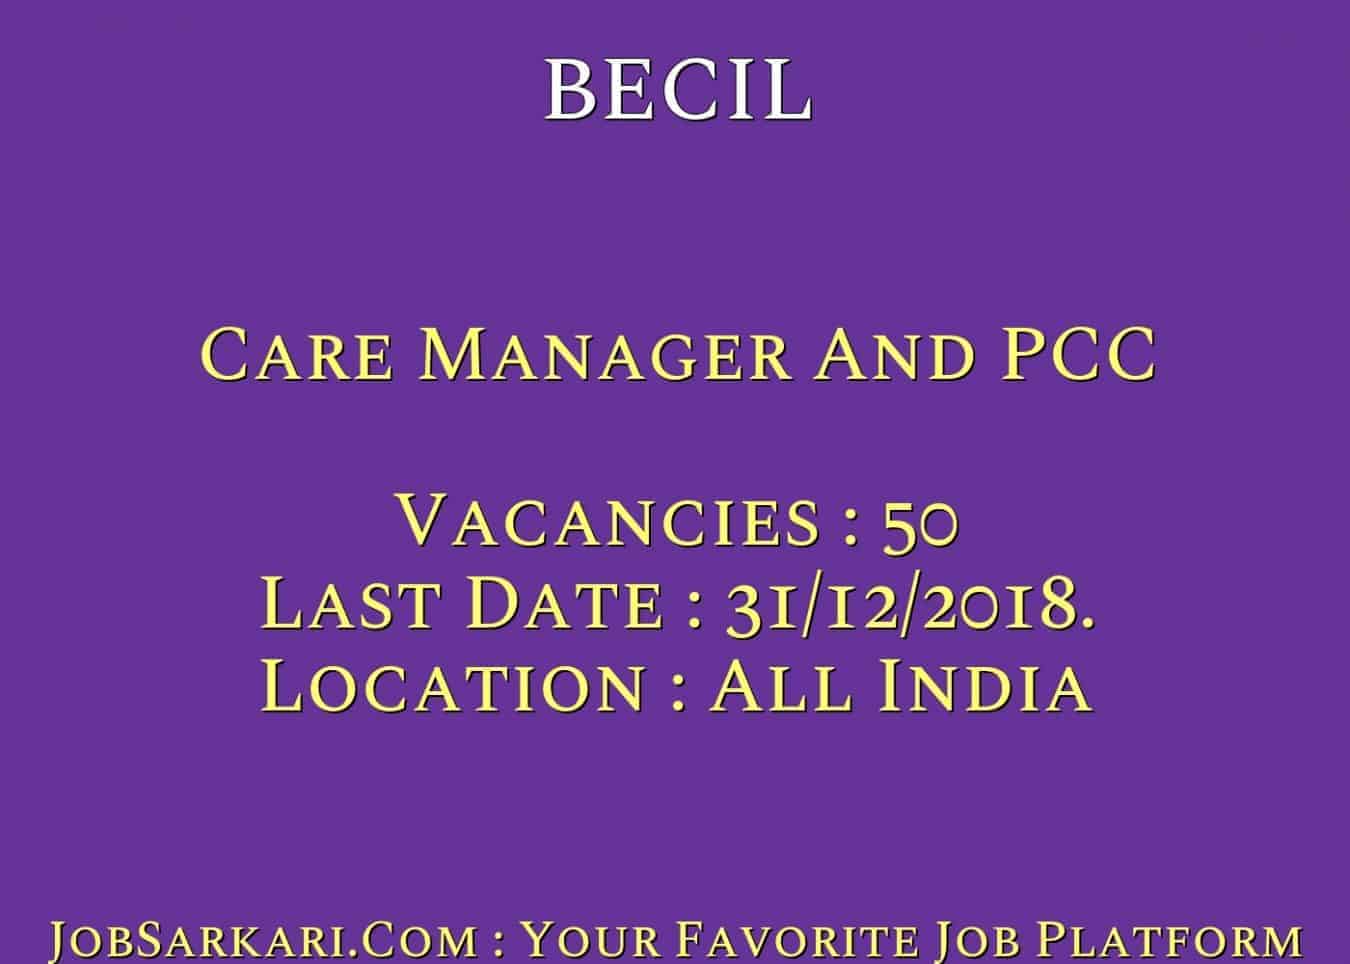 BECIL Recruitment 2018 For Patient Care Manager And PCC Govt Job